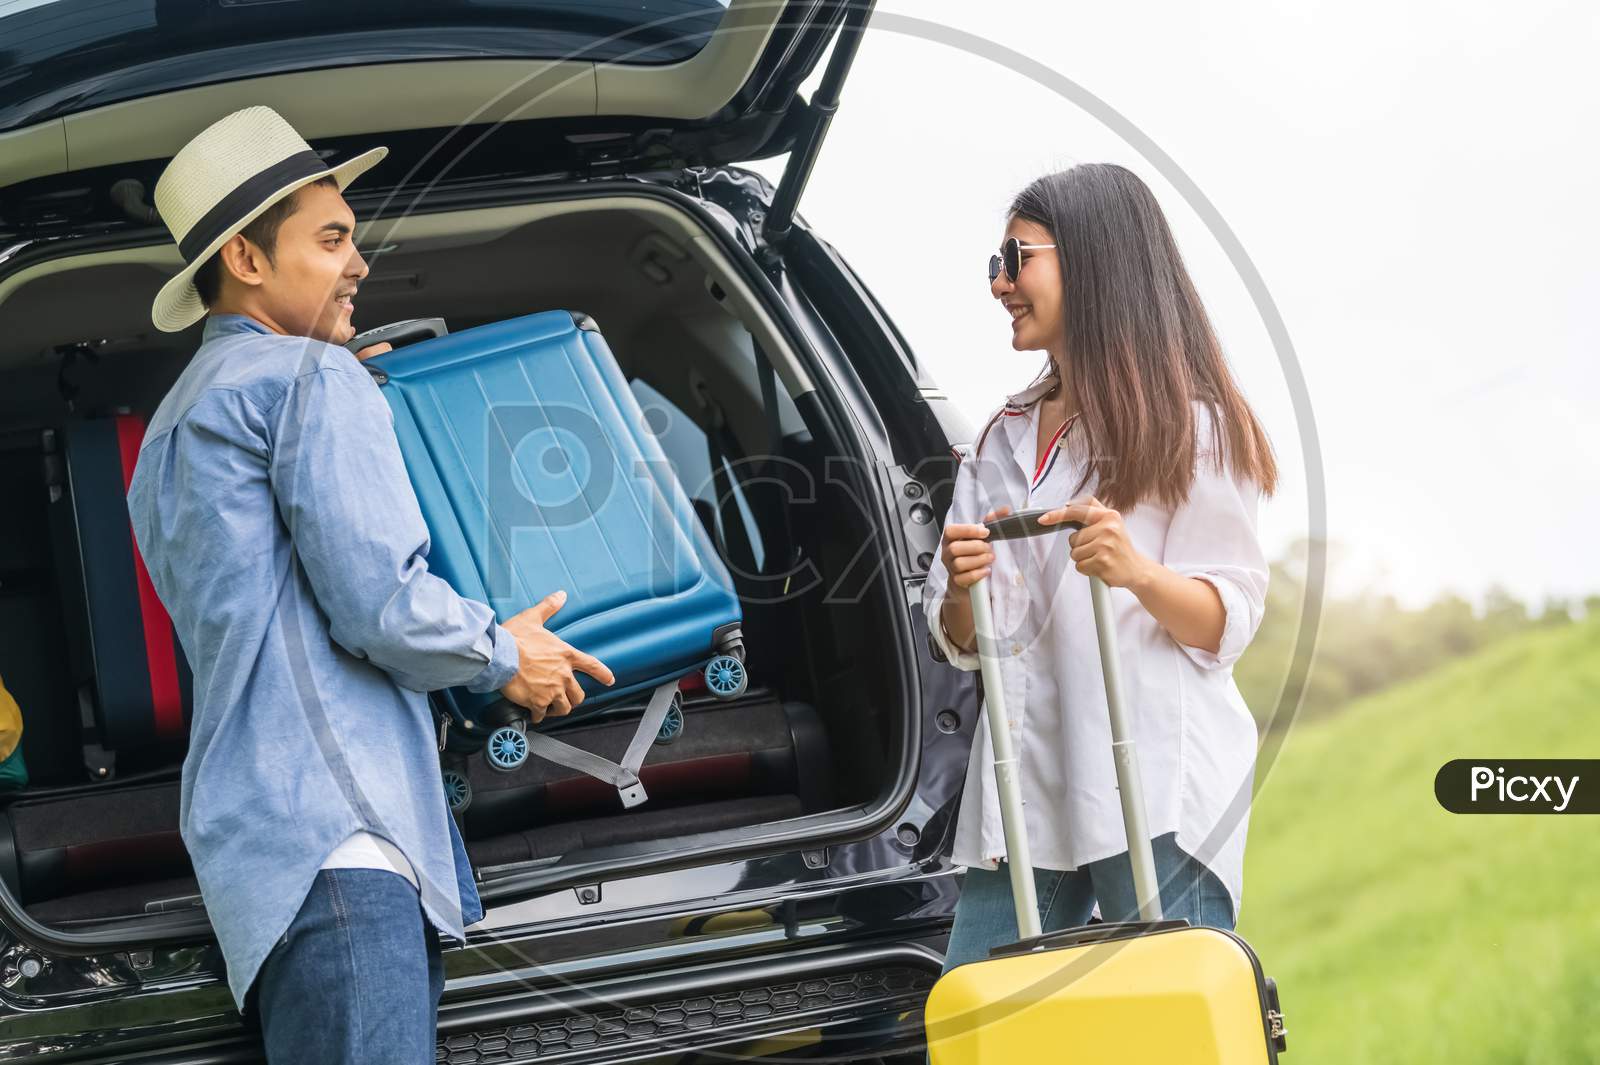 Asian Man Helping Woman To Lifting Suitcase From Car During Travel In Long Weekend. Couple Have Road Trip In Vacation With Yellow Luggage. People Lifestyle And Transportation Concept. Nice Guy Theme